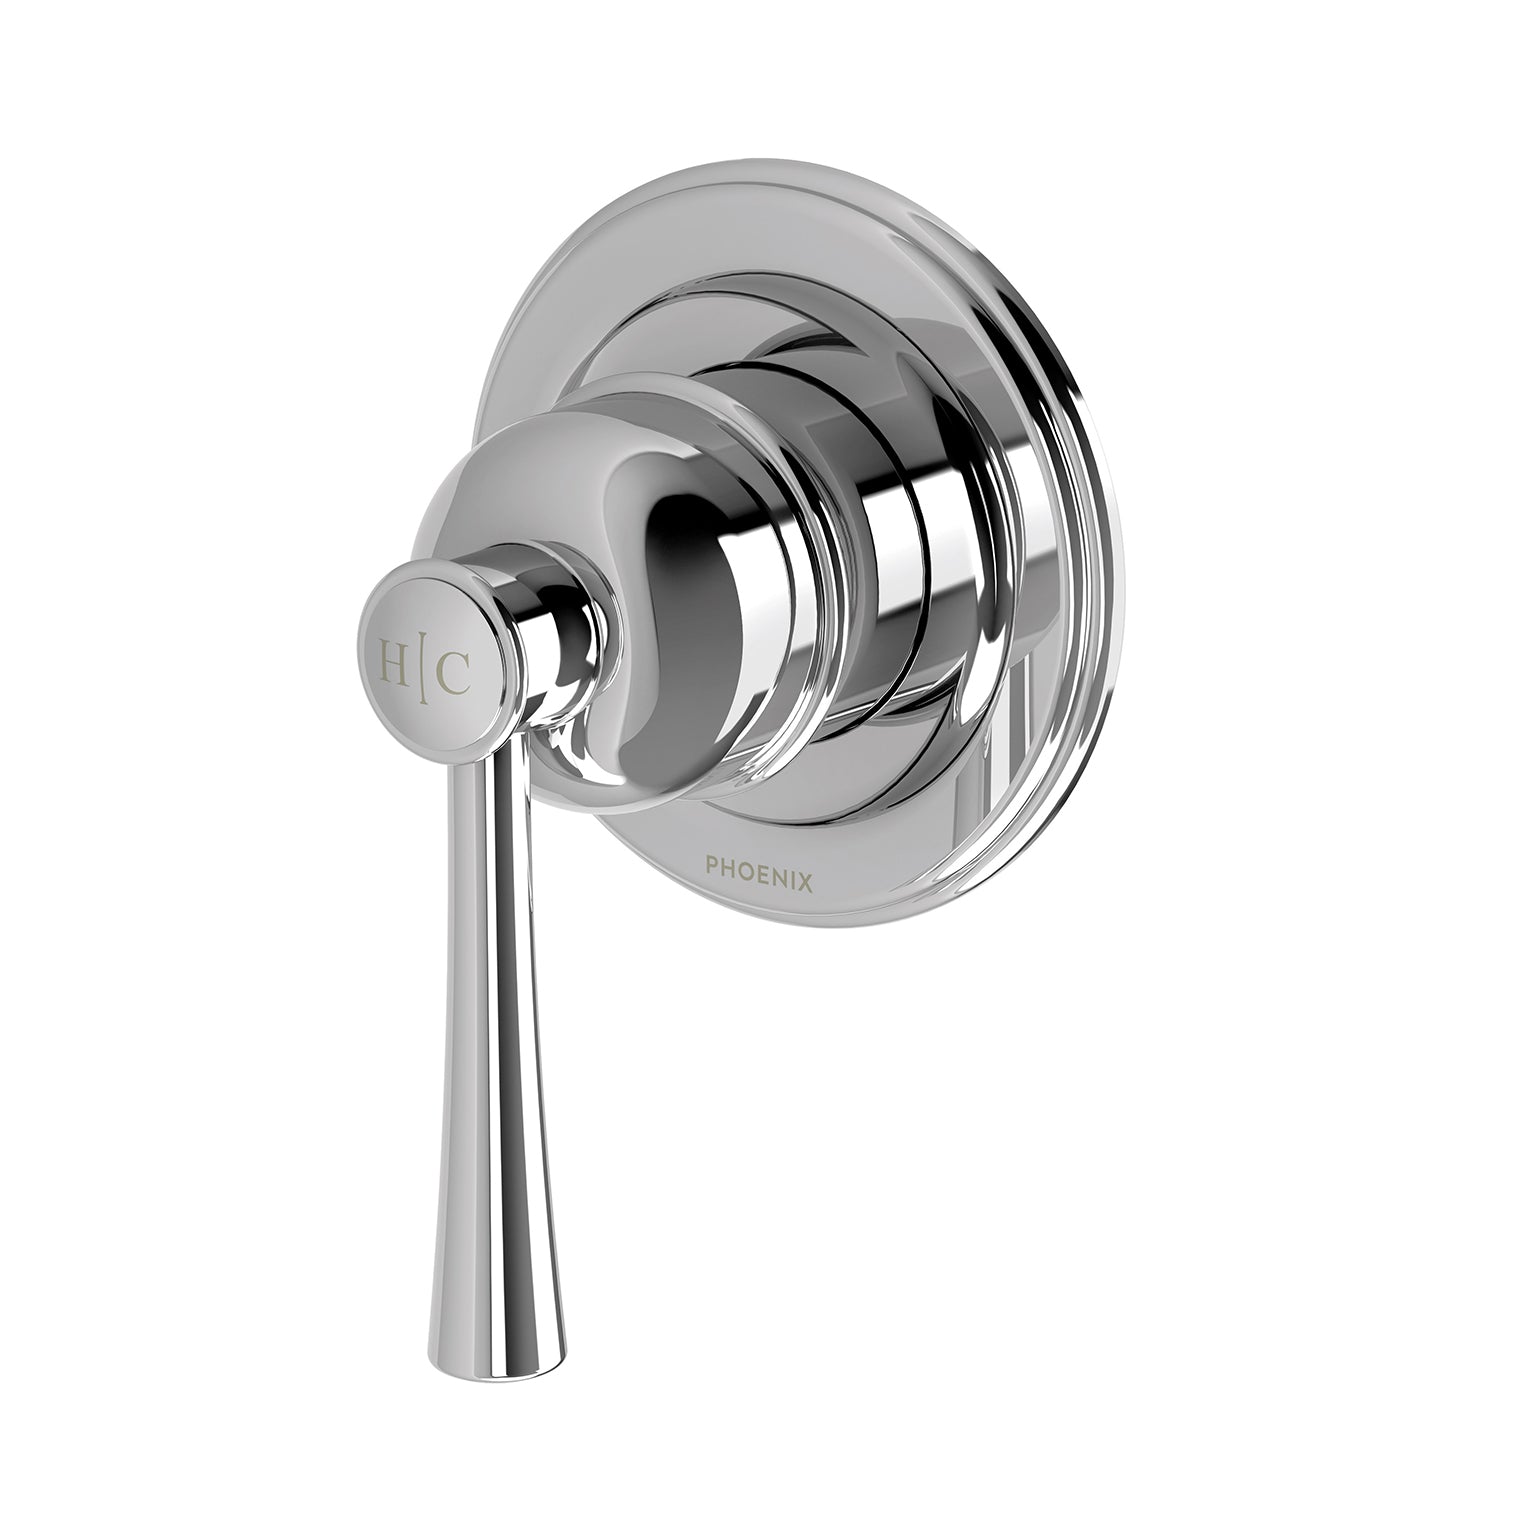 PHOENIX CROMFORD SWITCHMIX SHOWER / WALL MIXER FIT-OFF AND ROUGH-IN KIT CHROME